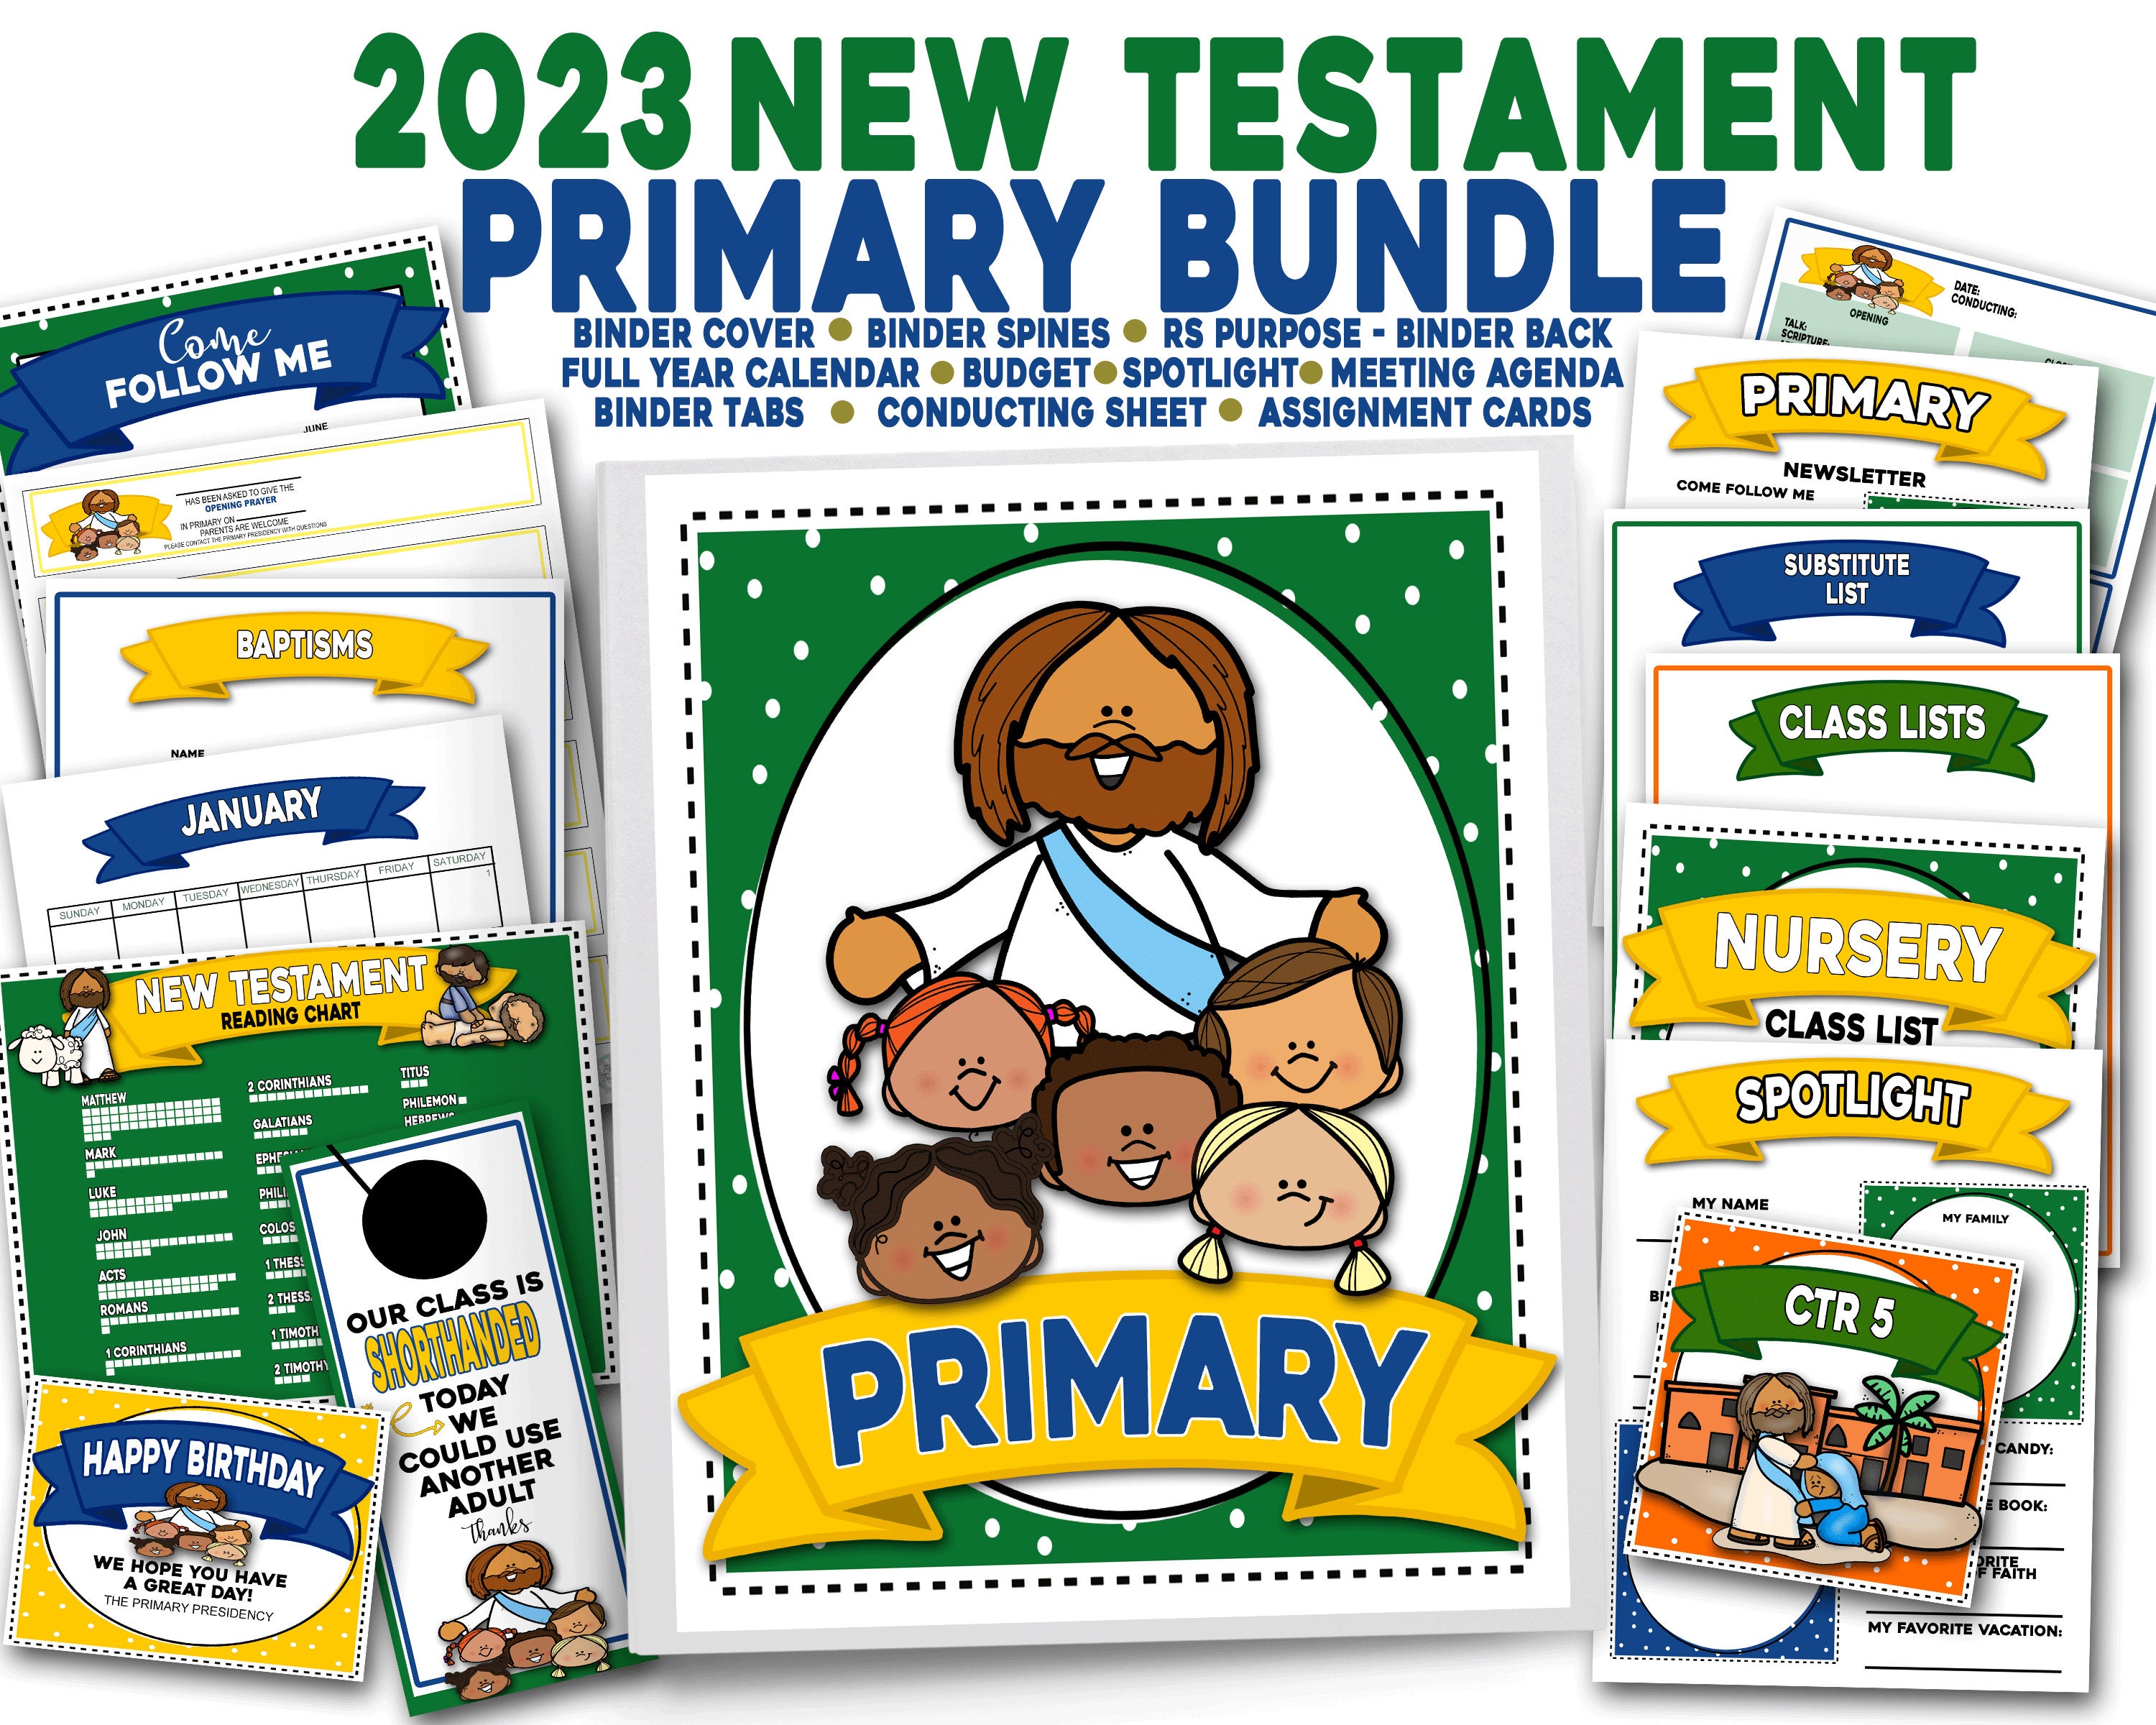 2022 Old Testament: Coloring Kit - The Red Headed Hostess